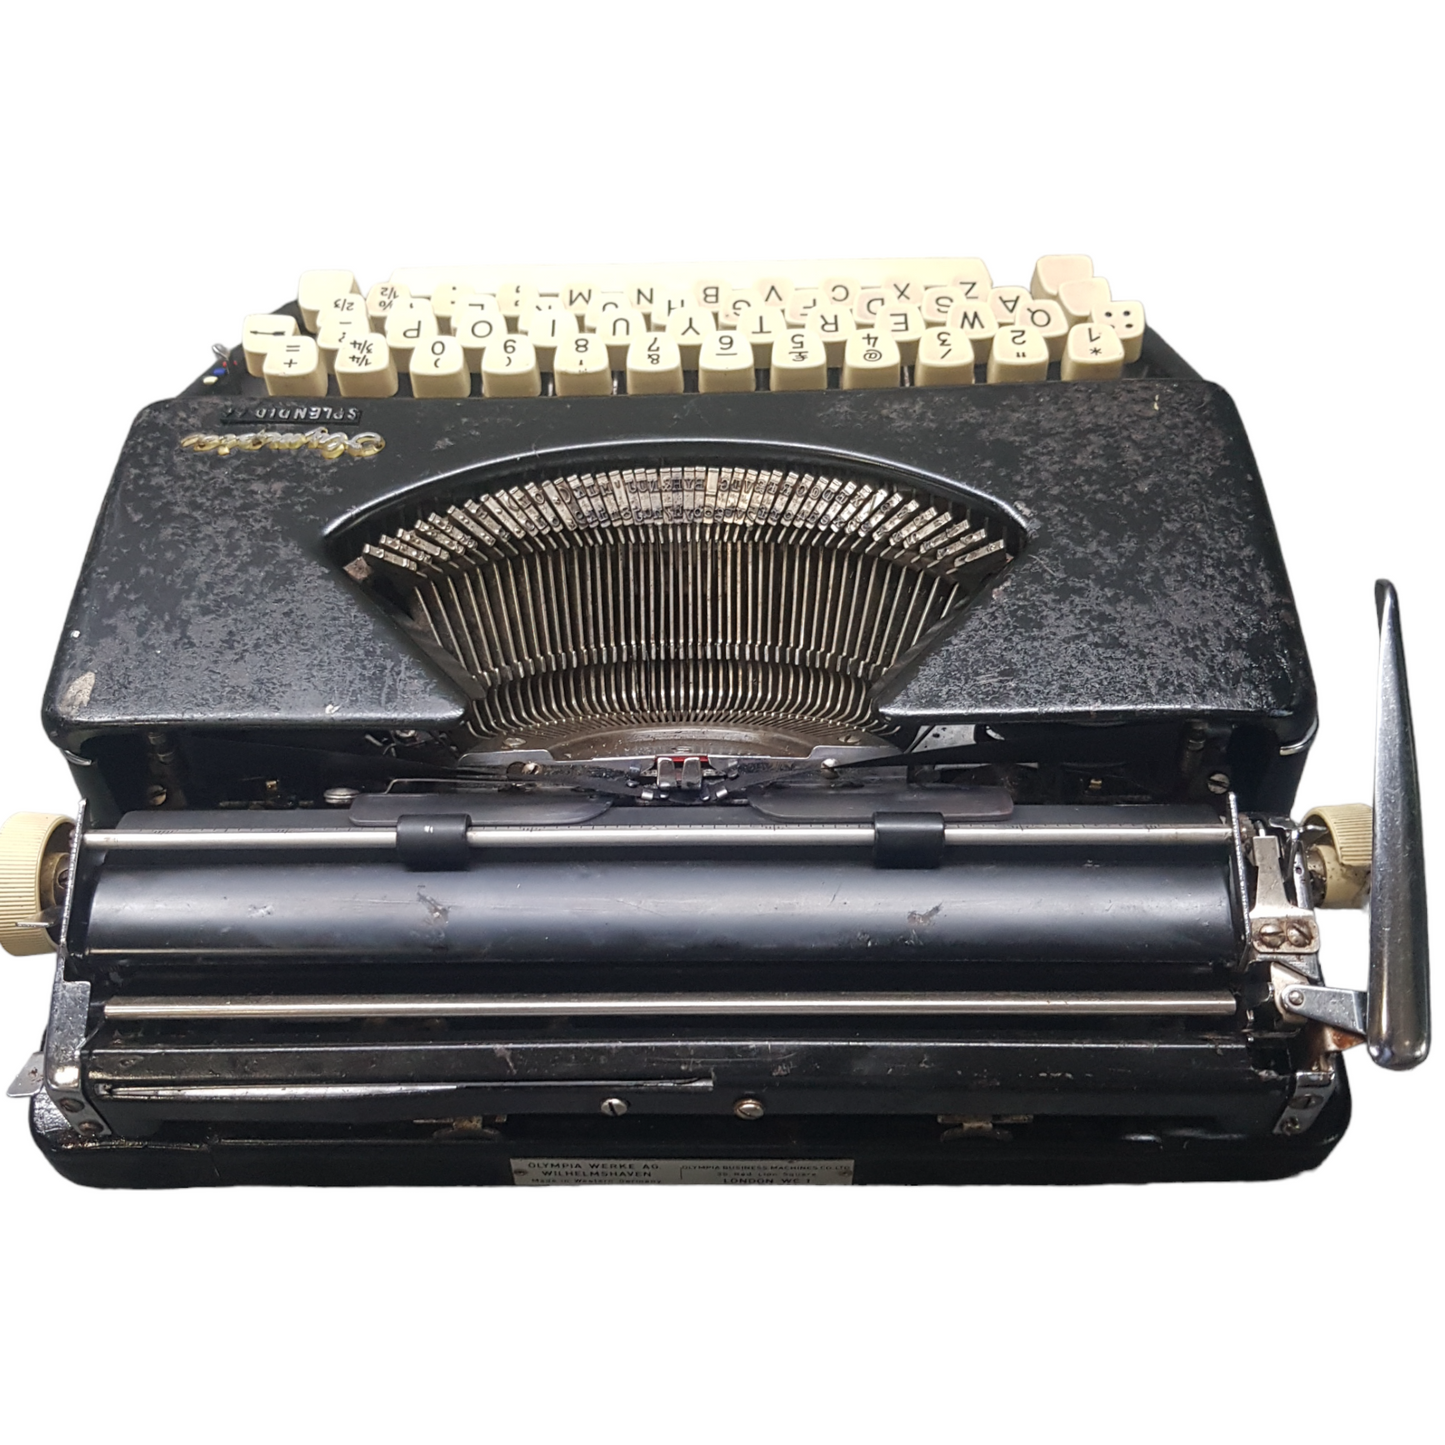 Image of Olympia Splendid Portable Typewriter. Almost smallest portable typewriter. Made in Germany. Available from universaltypewritercompany.in.